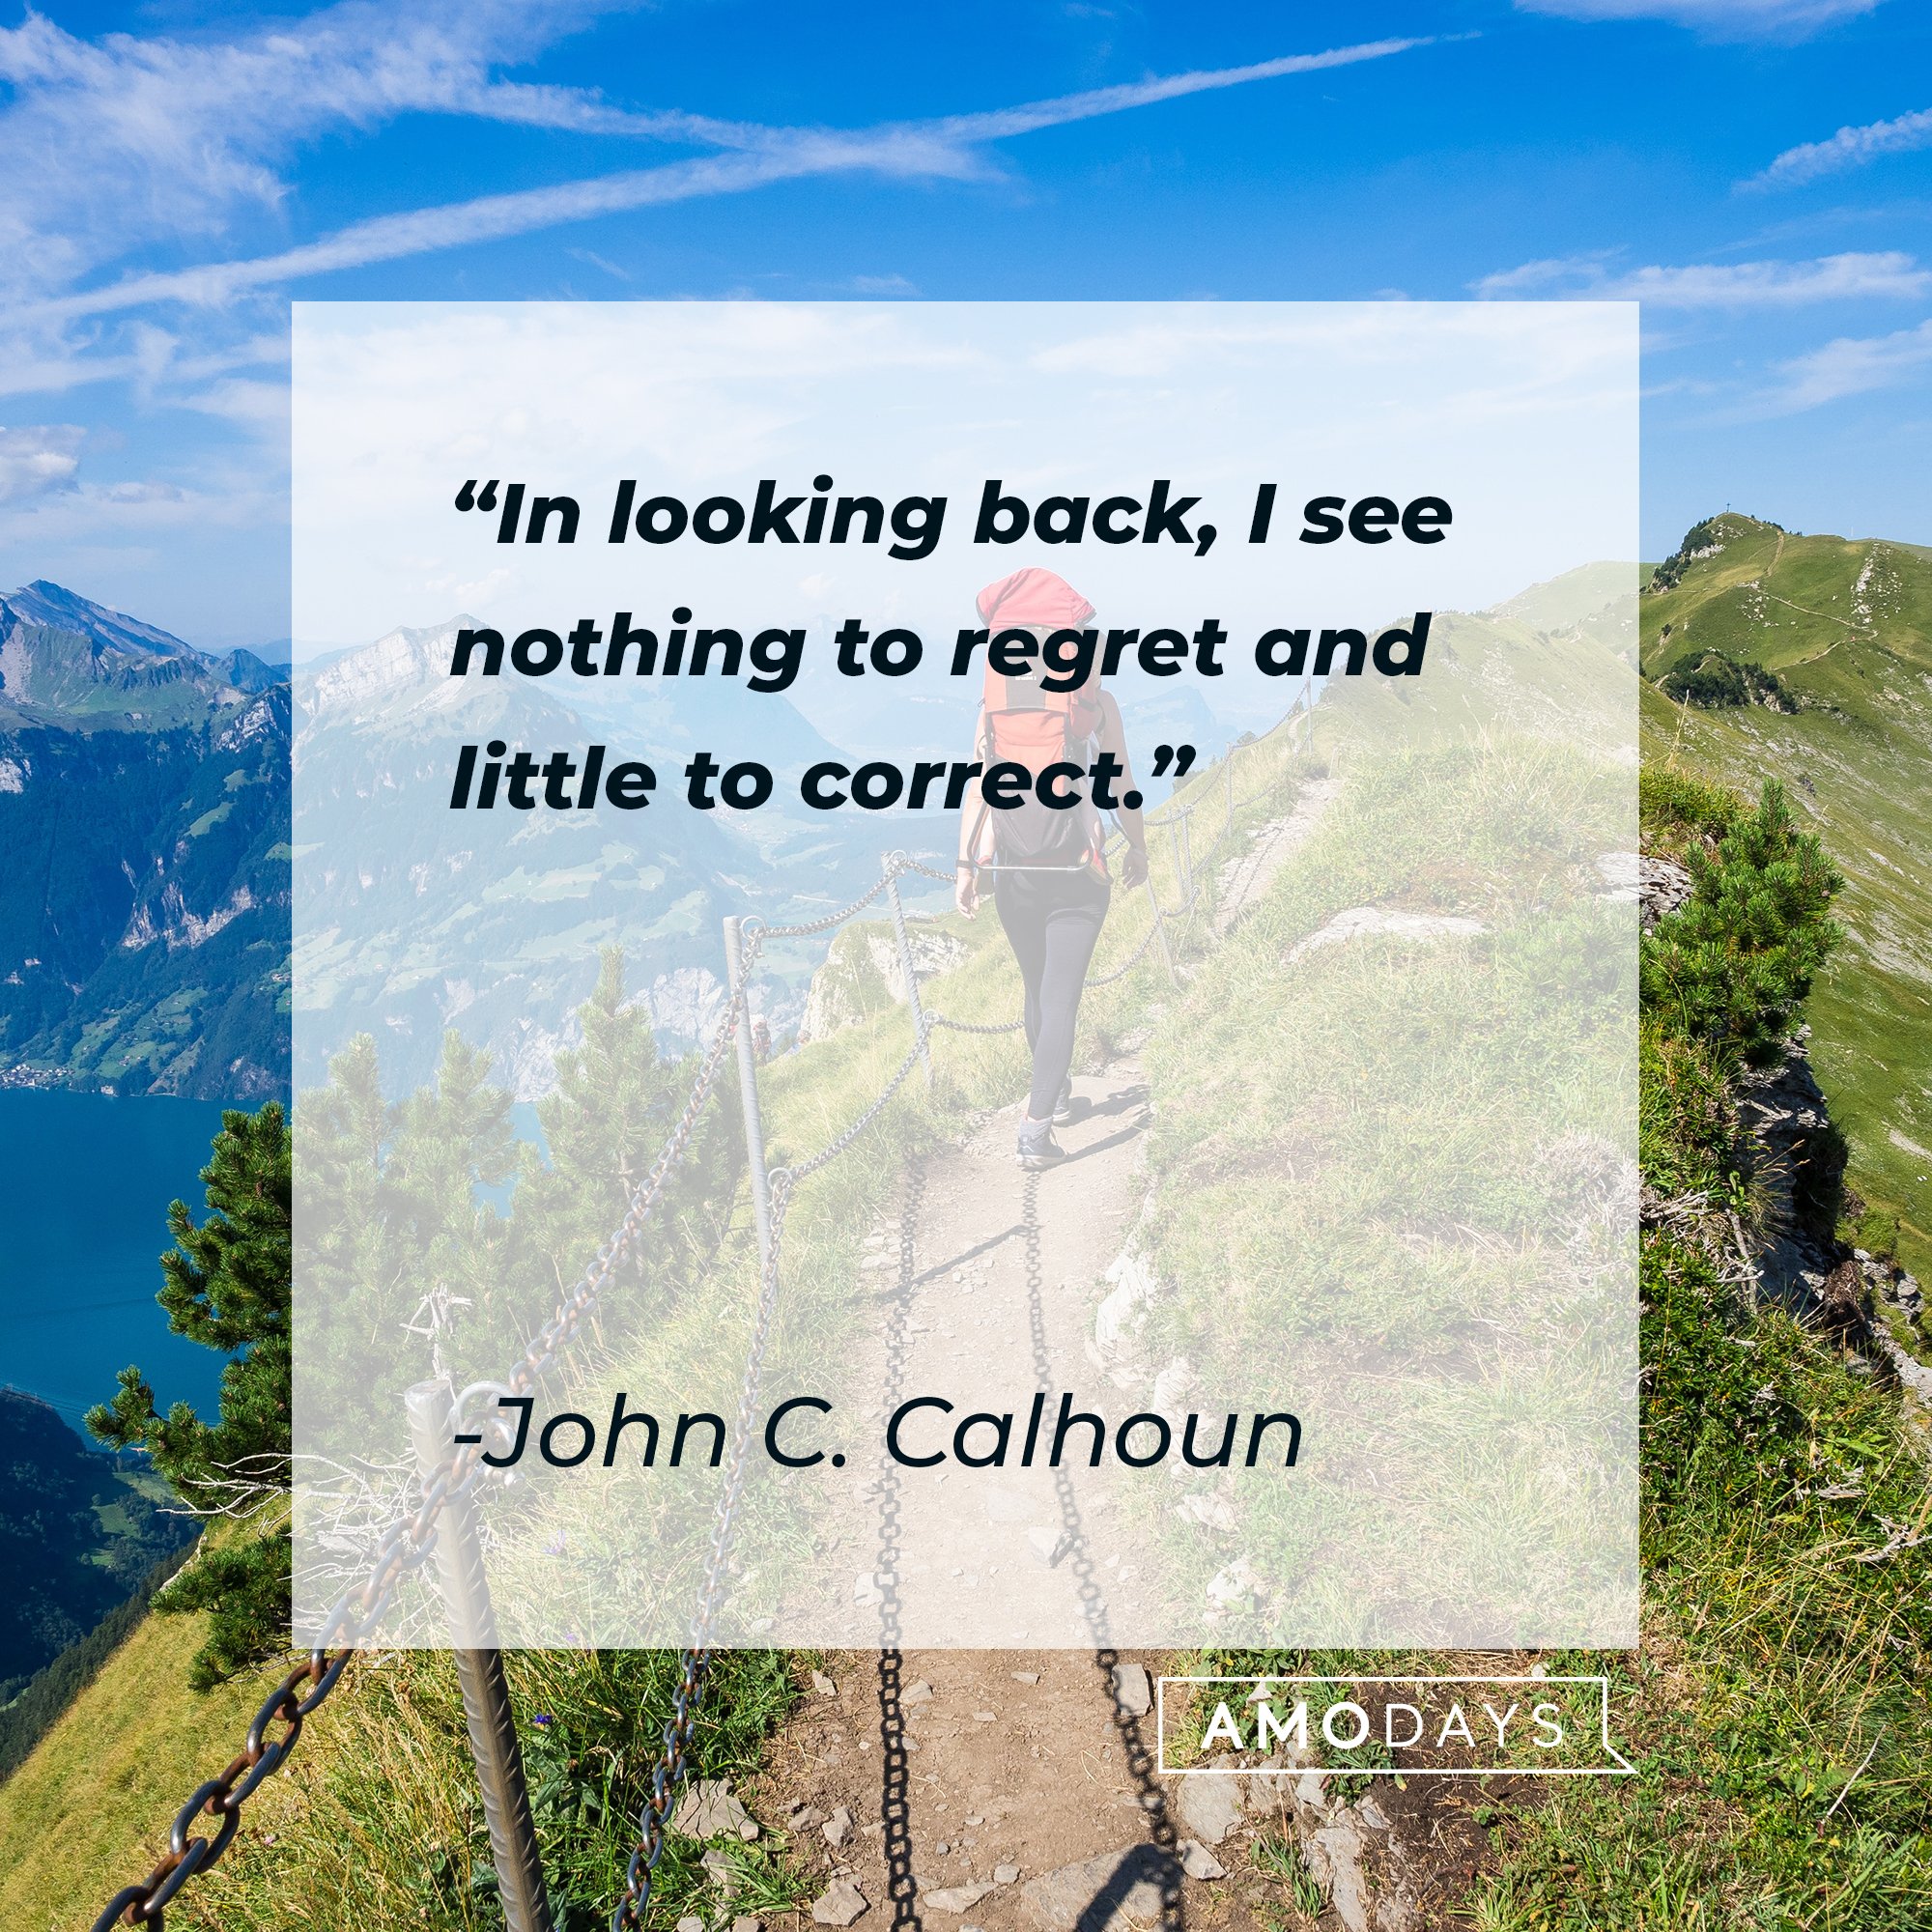  John C. Calhoun’s quote: "In looking back, I see nothing to regret and little to correct." | Image: AmoDays